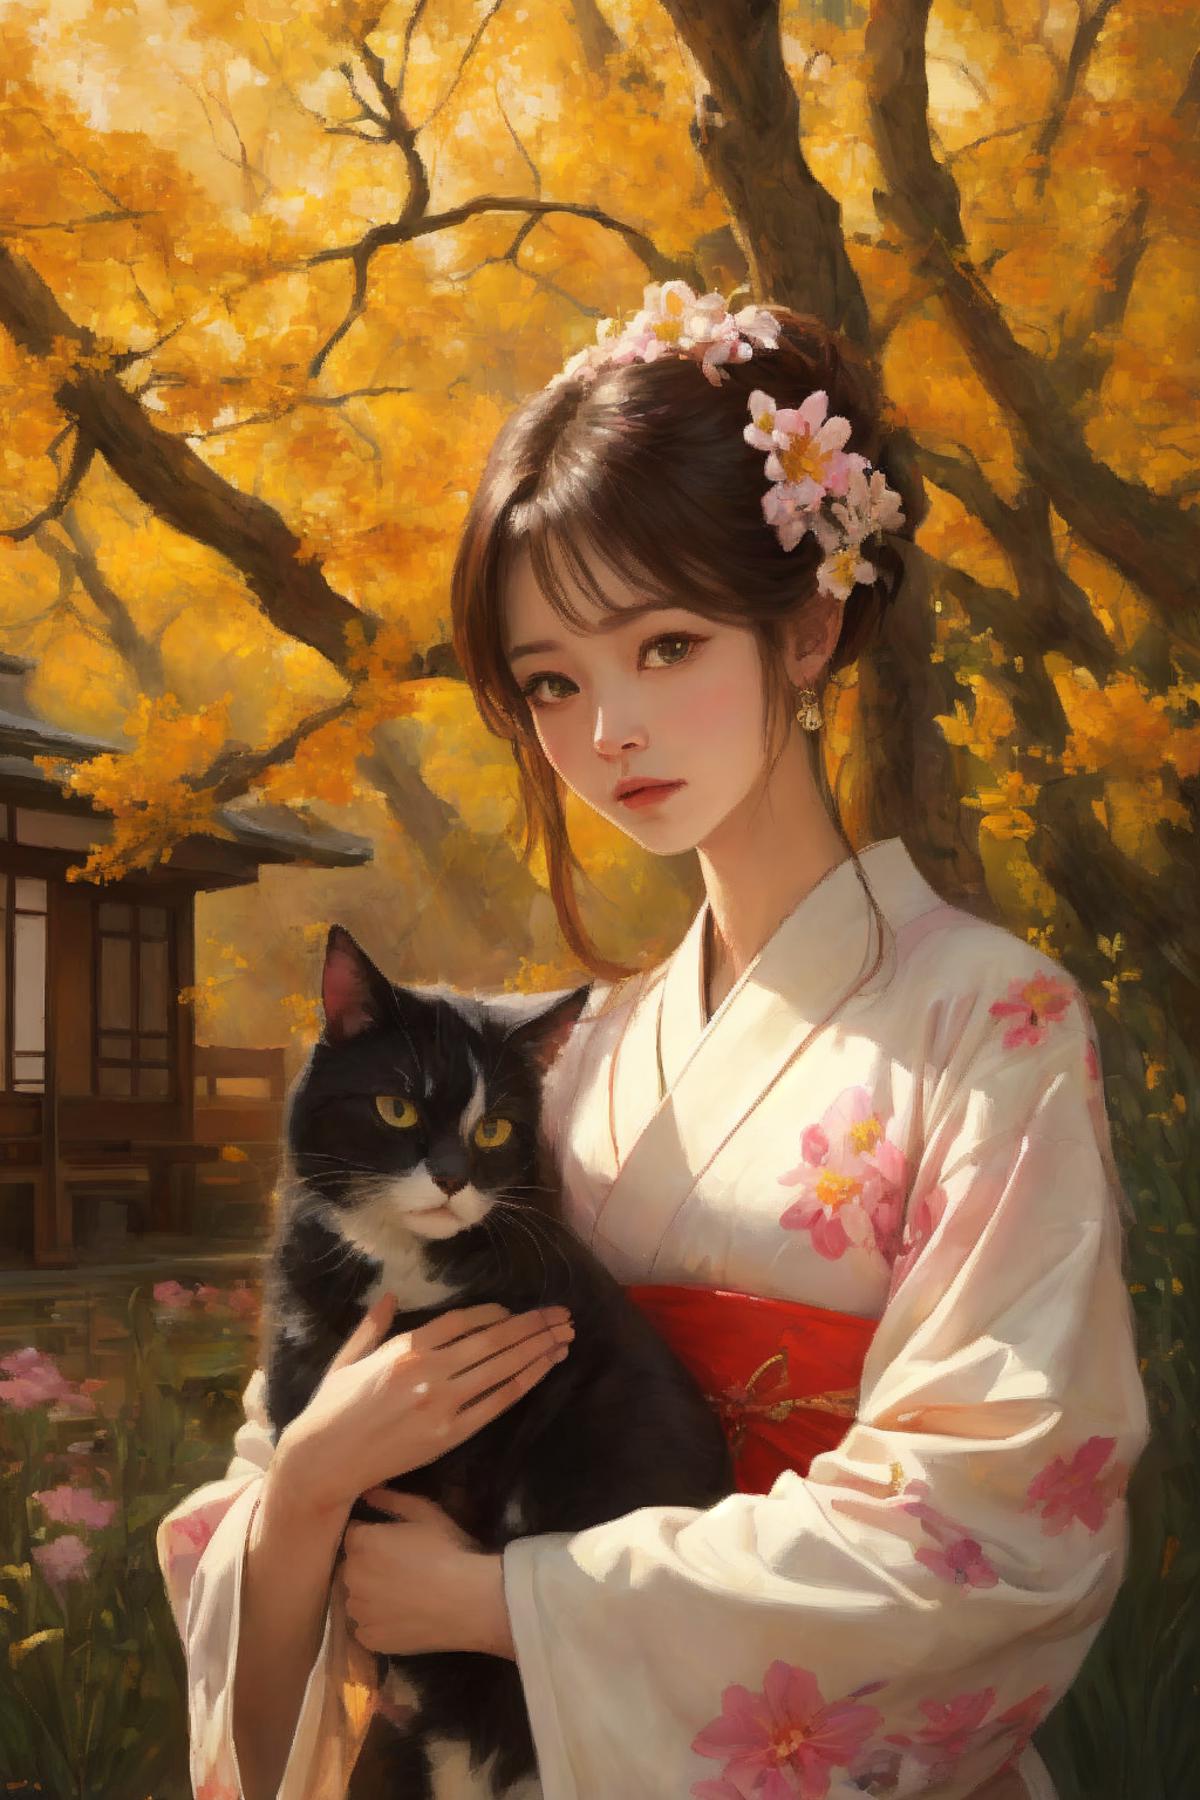 A woman in a kimono holding a cat in an Asian-inspired painting.